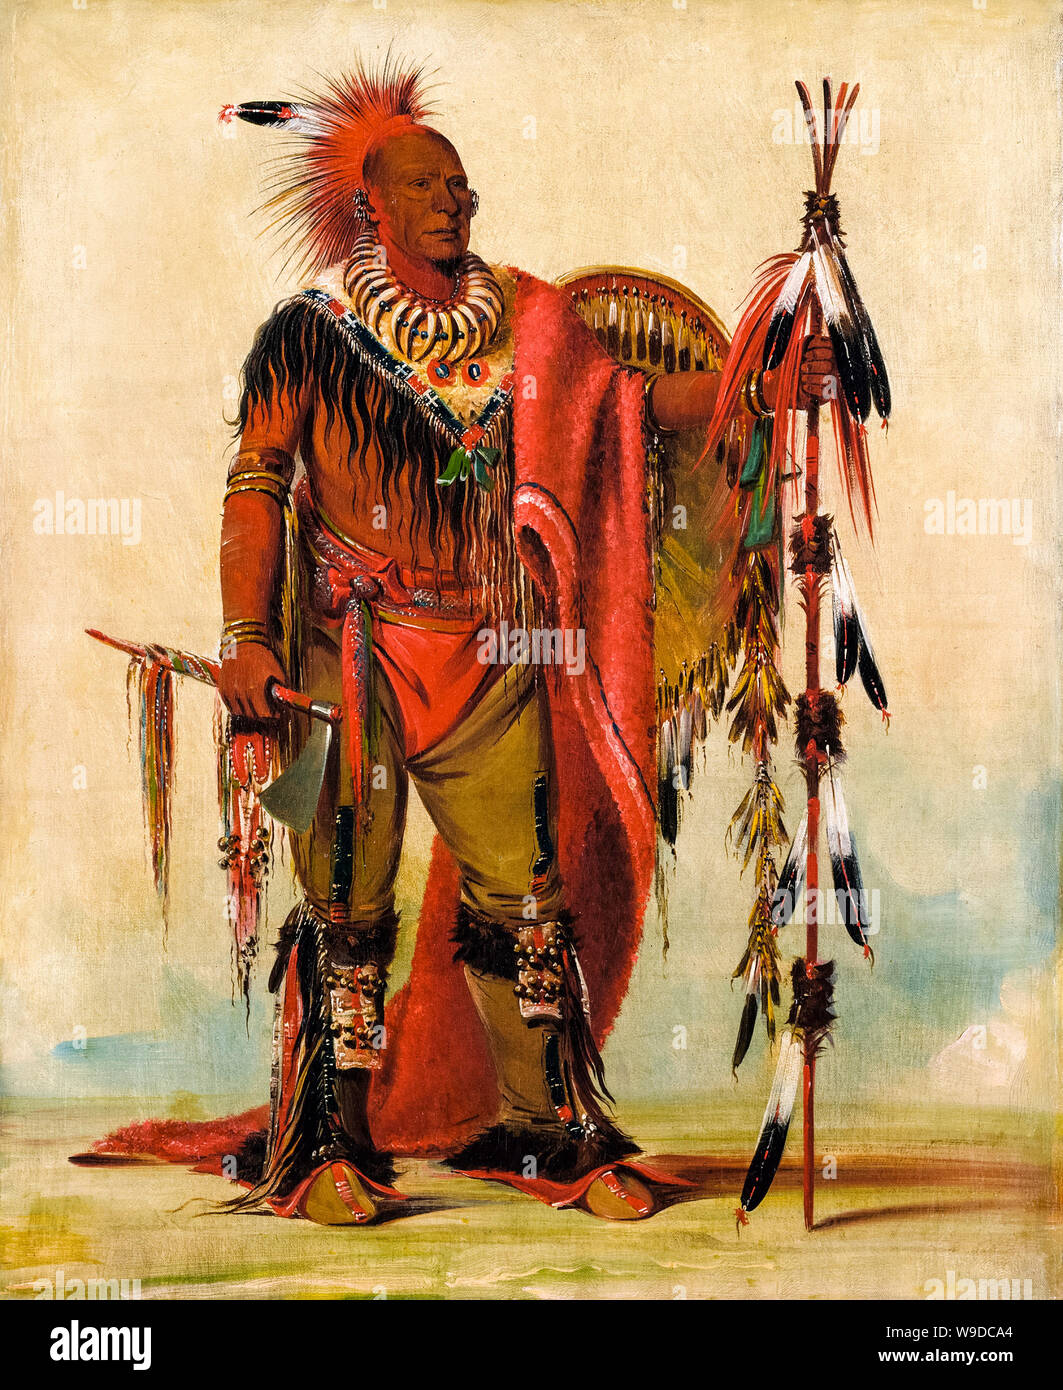 George Catlin, Kee-o-kúk, The Watchful Fox, Chief of the Tribe, portrait painting, 1835 Stock Photo